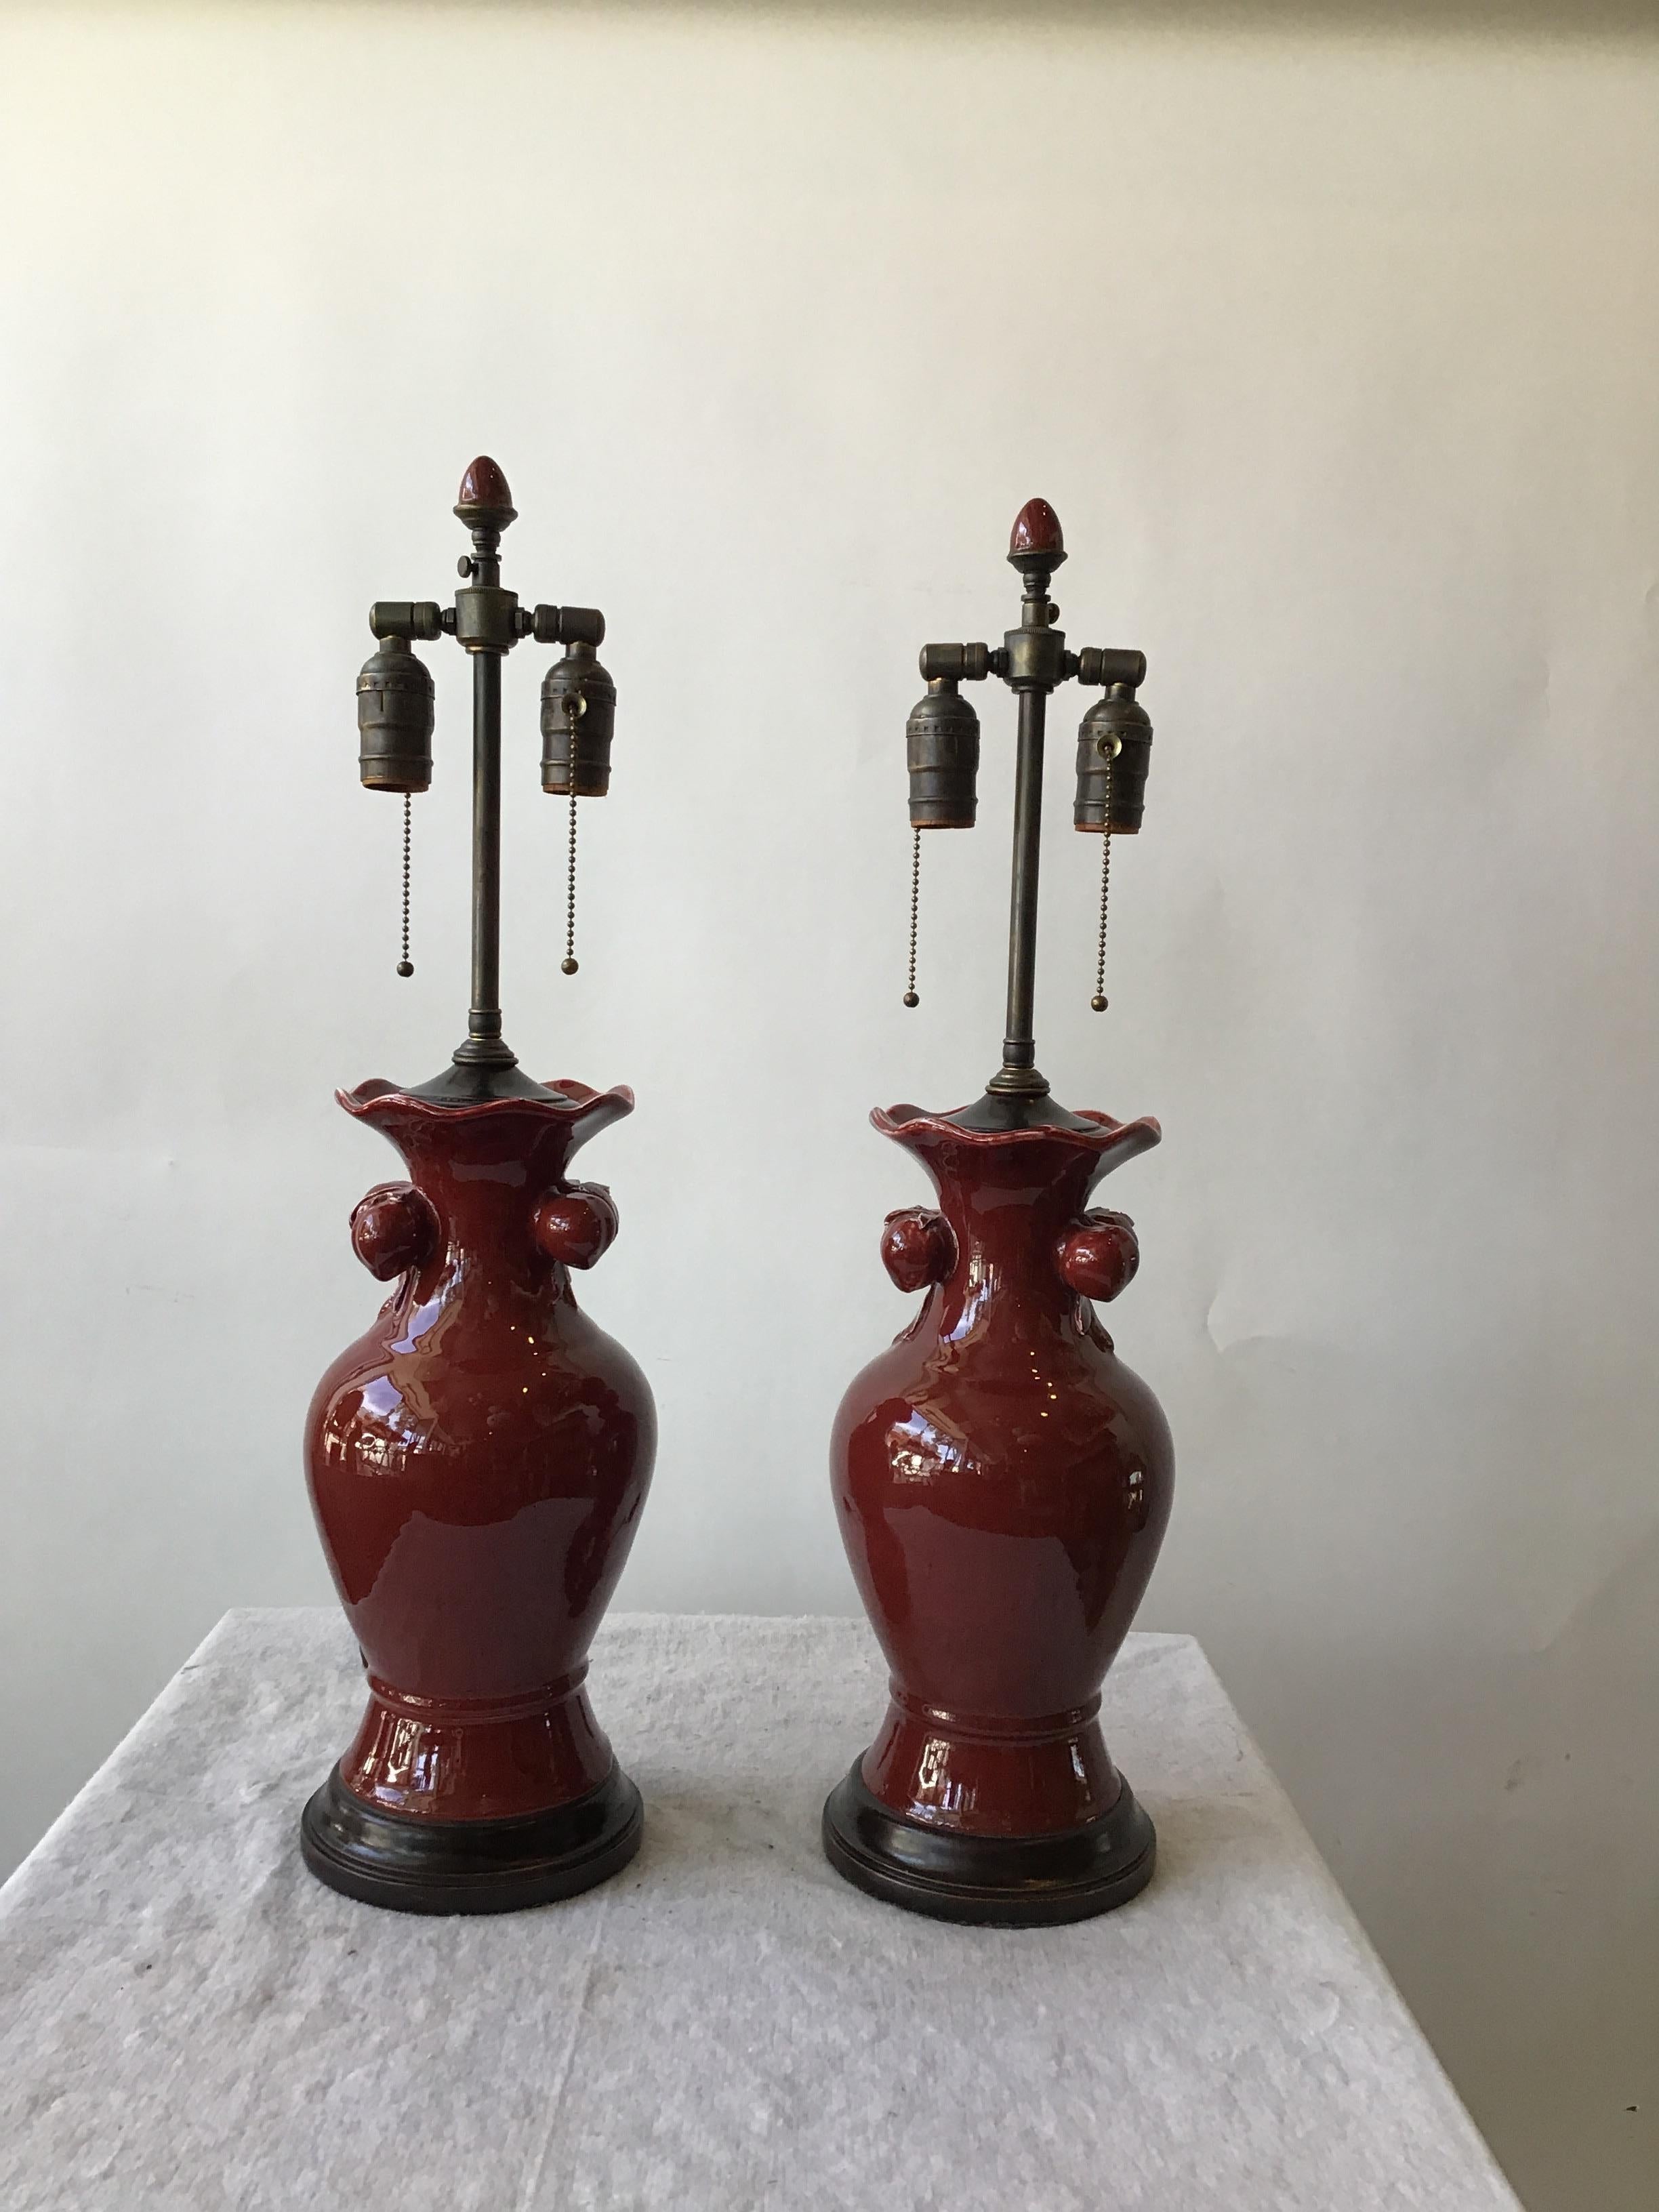 Pair of 1940s ceramic oxblood lamps
On wood base
With ceramic finial.